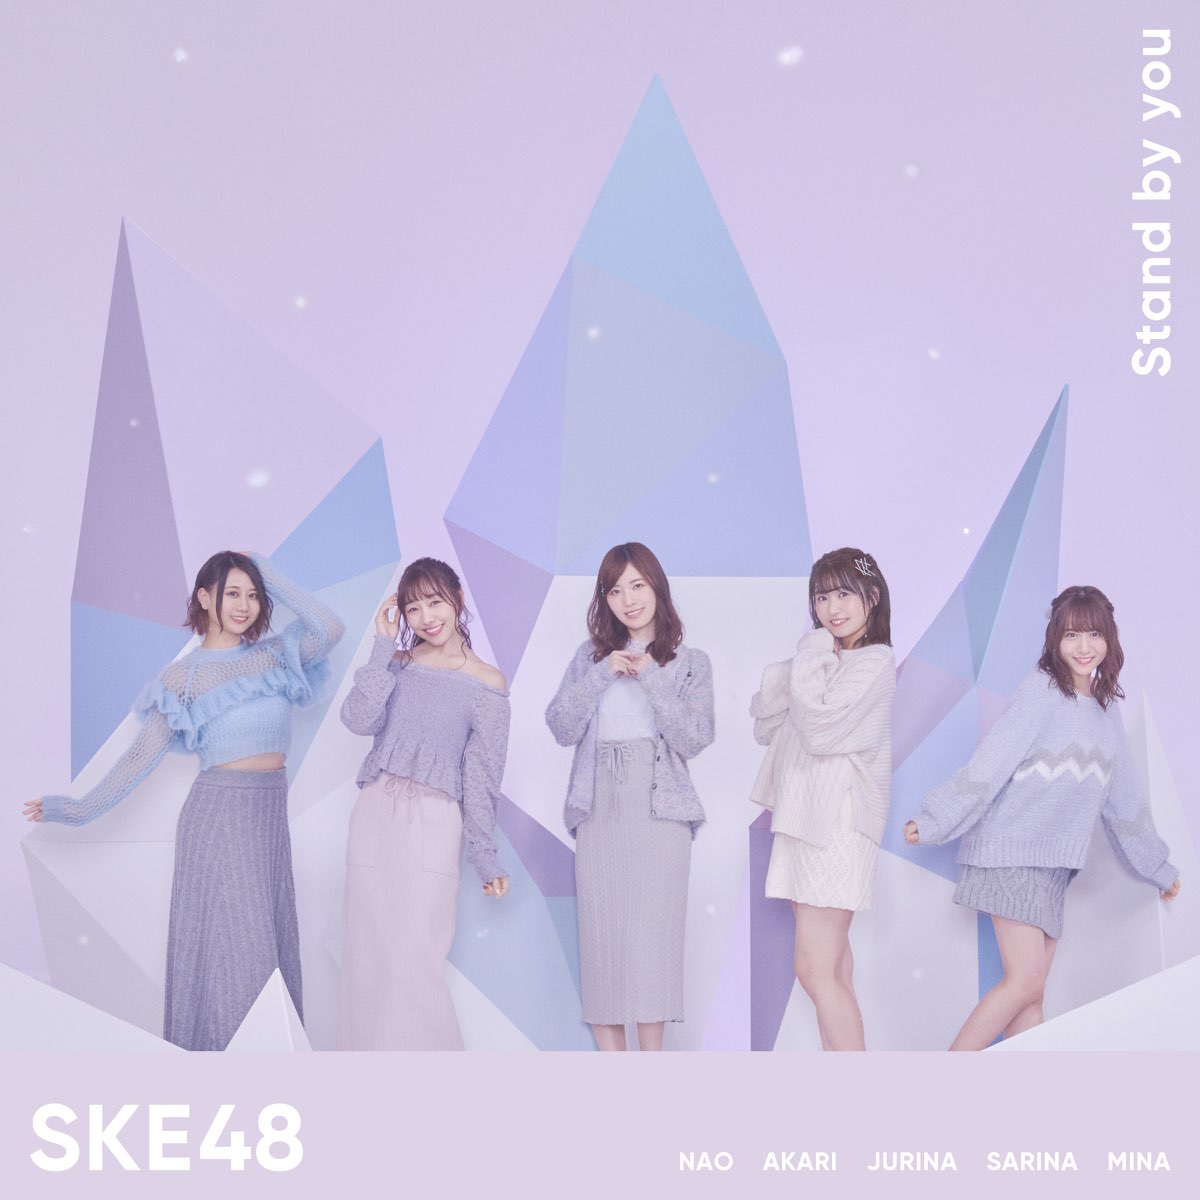 SKE48 — Stand by you cover artwork